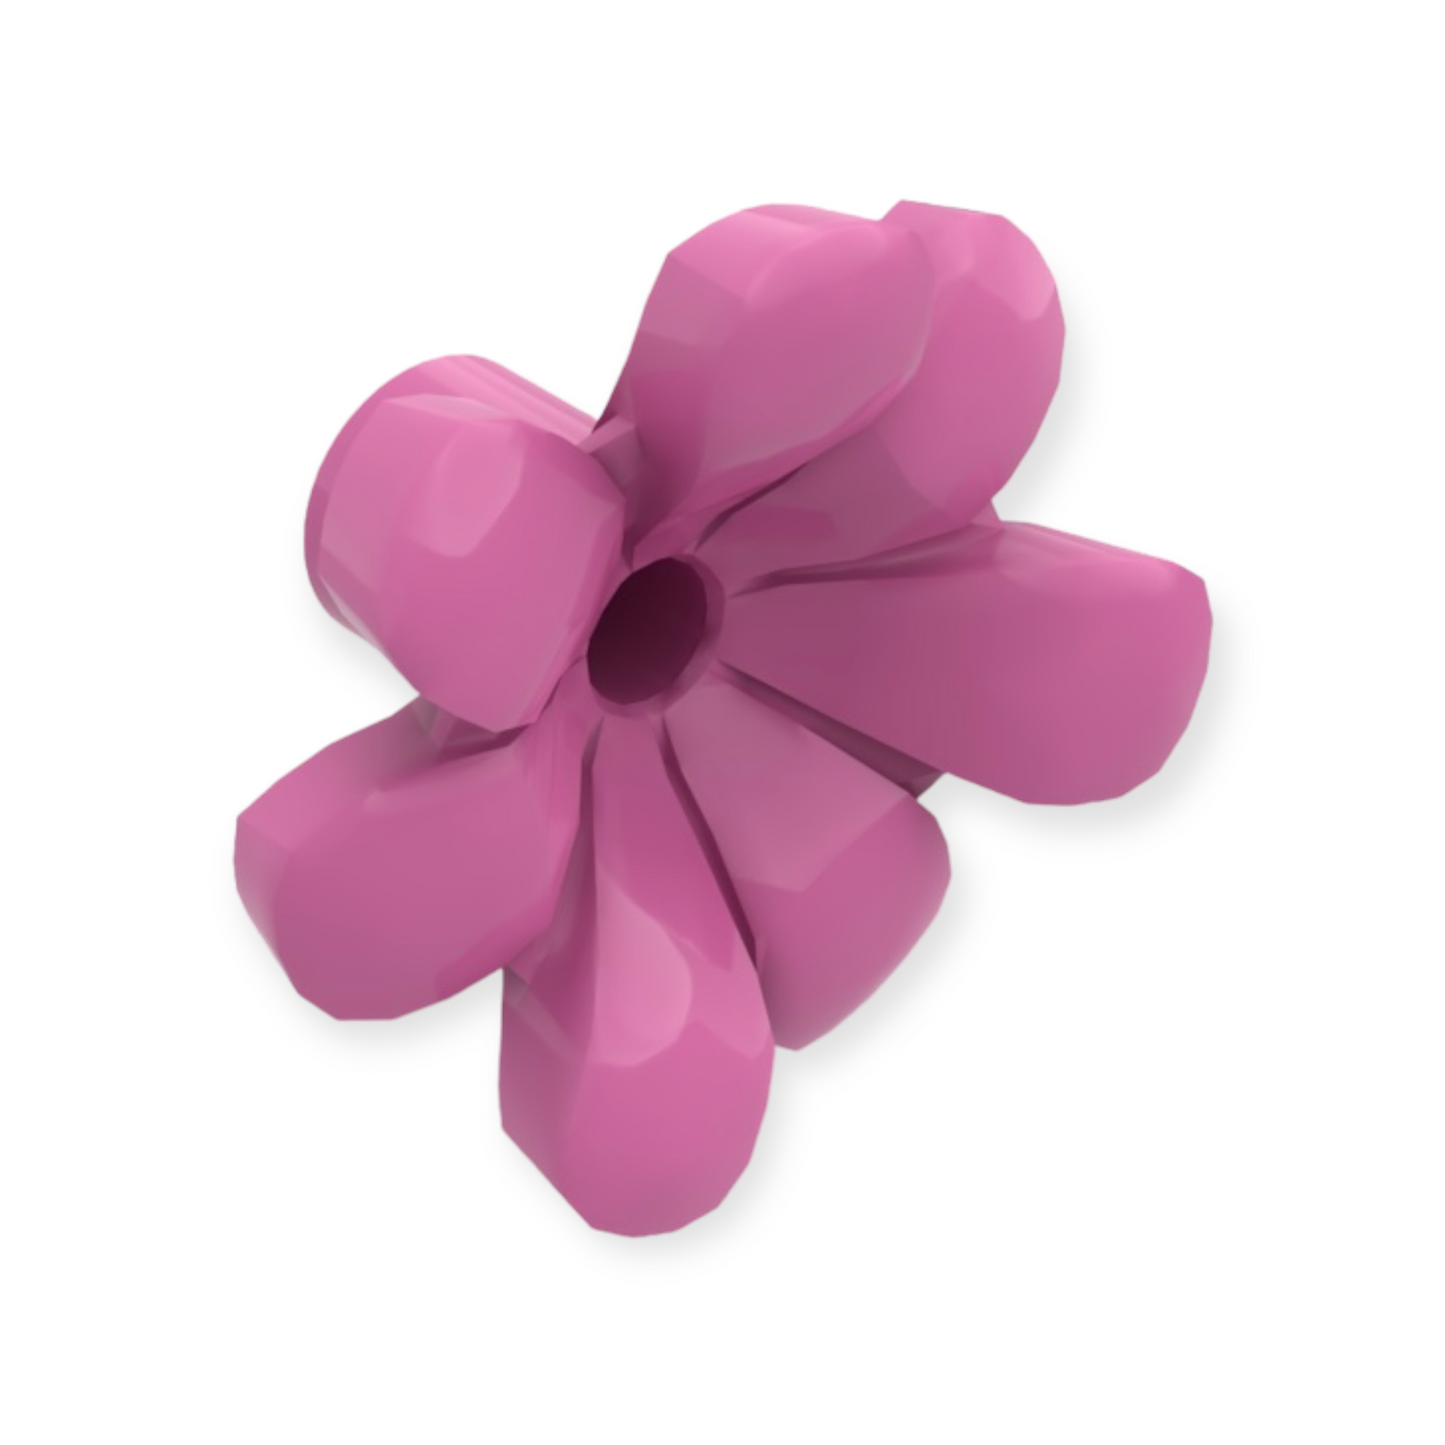 LEGO Flower with Bar and Small Pin Hole in Dark Pink